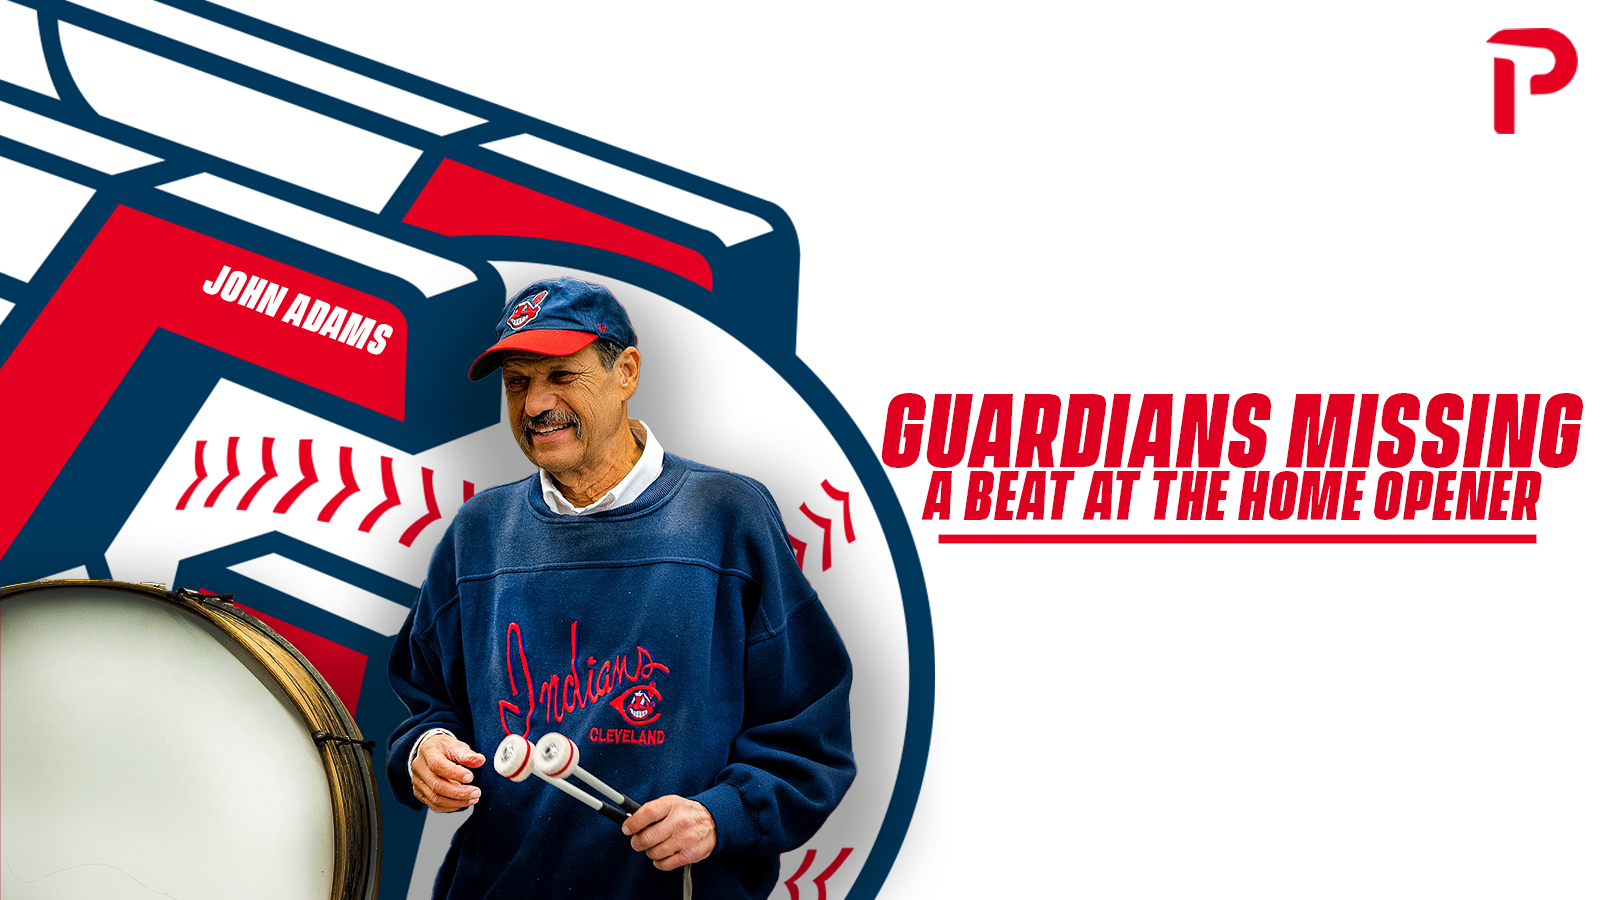 The Cleveland Guardians Send the Rays Back to Tampa with a Bang